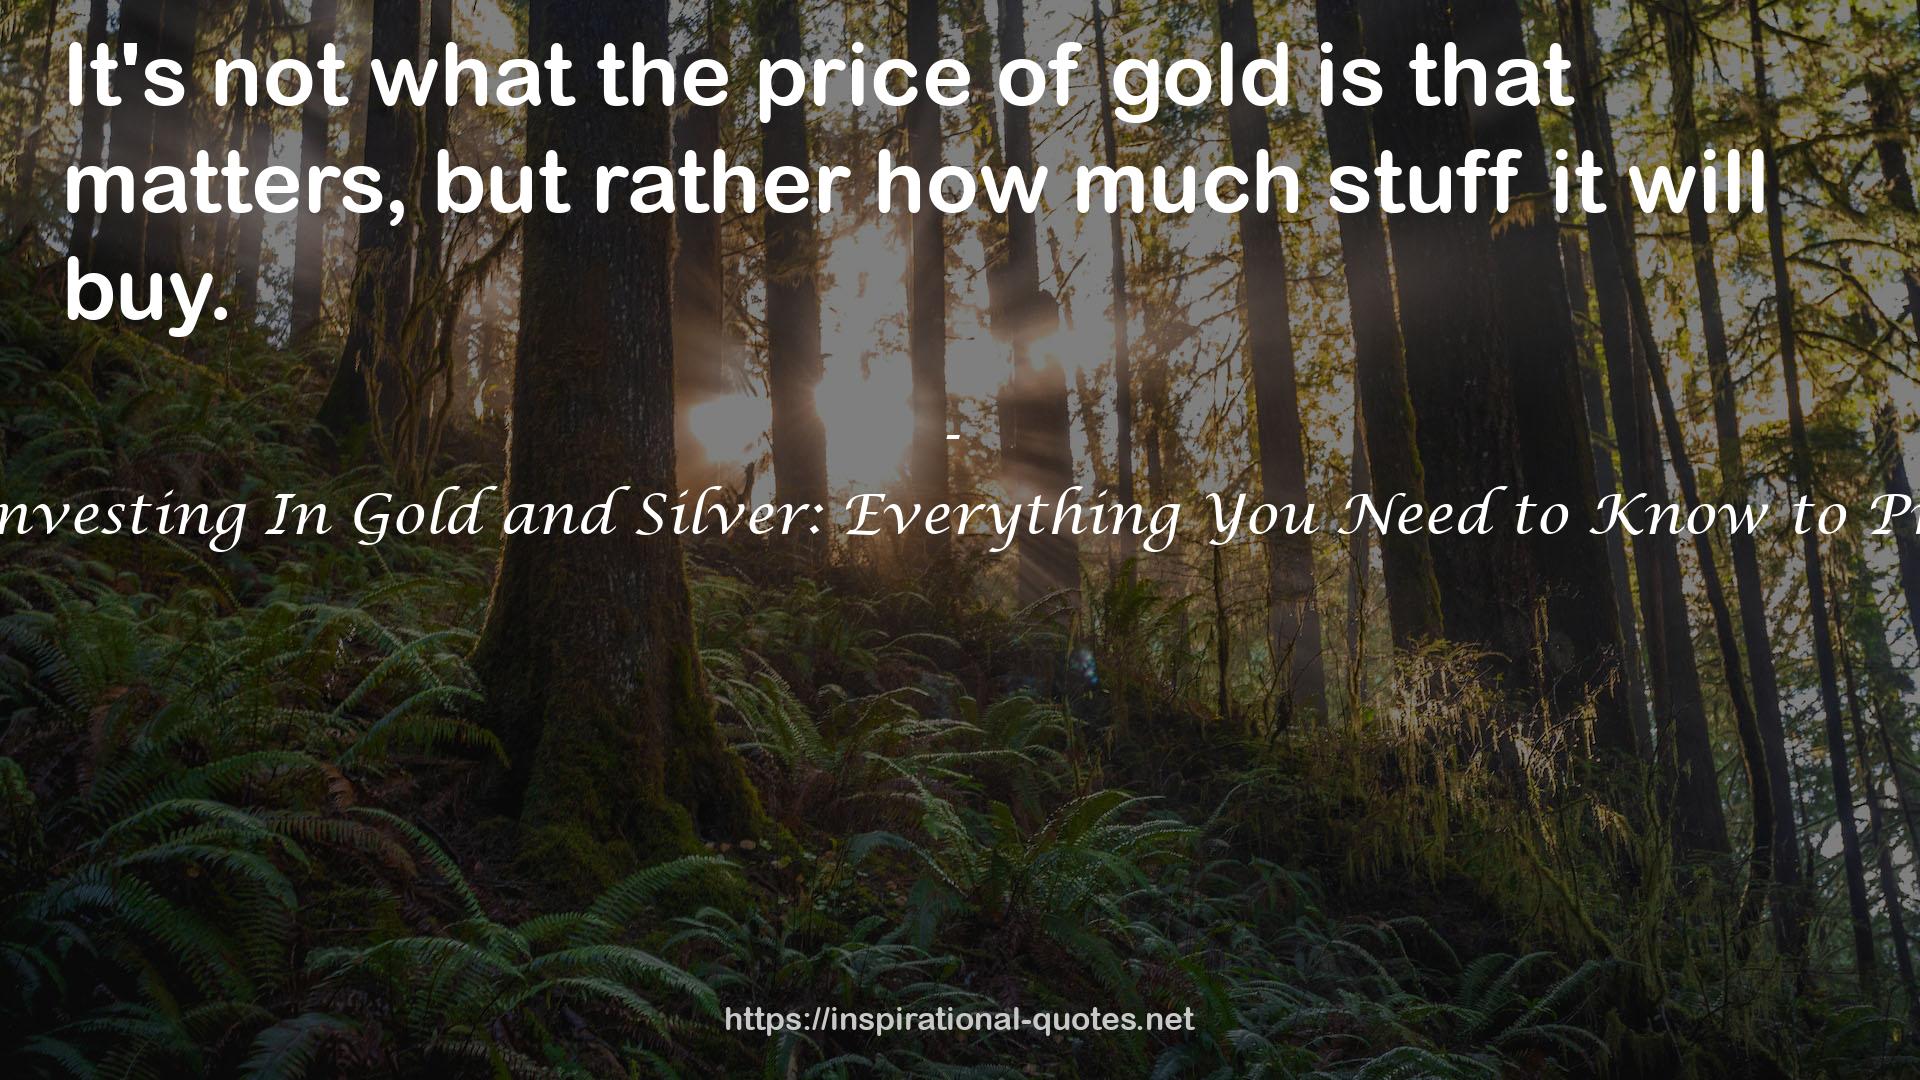 Rich Dad's Advisors: Guide to Investing In Gold and Silver: Everything You Need to Know to Profit from Precious Metals Now QUOTES